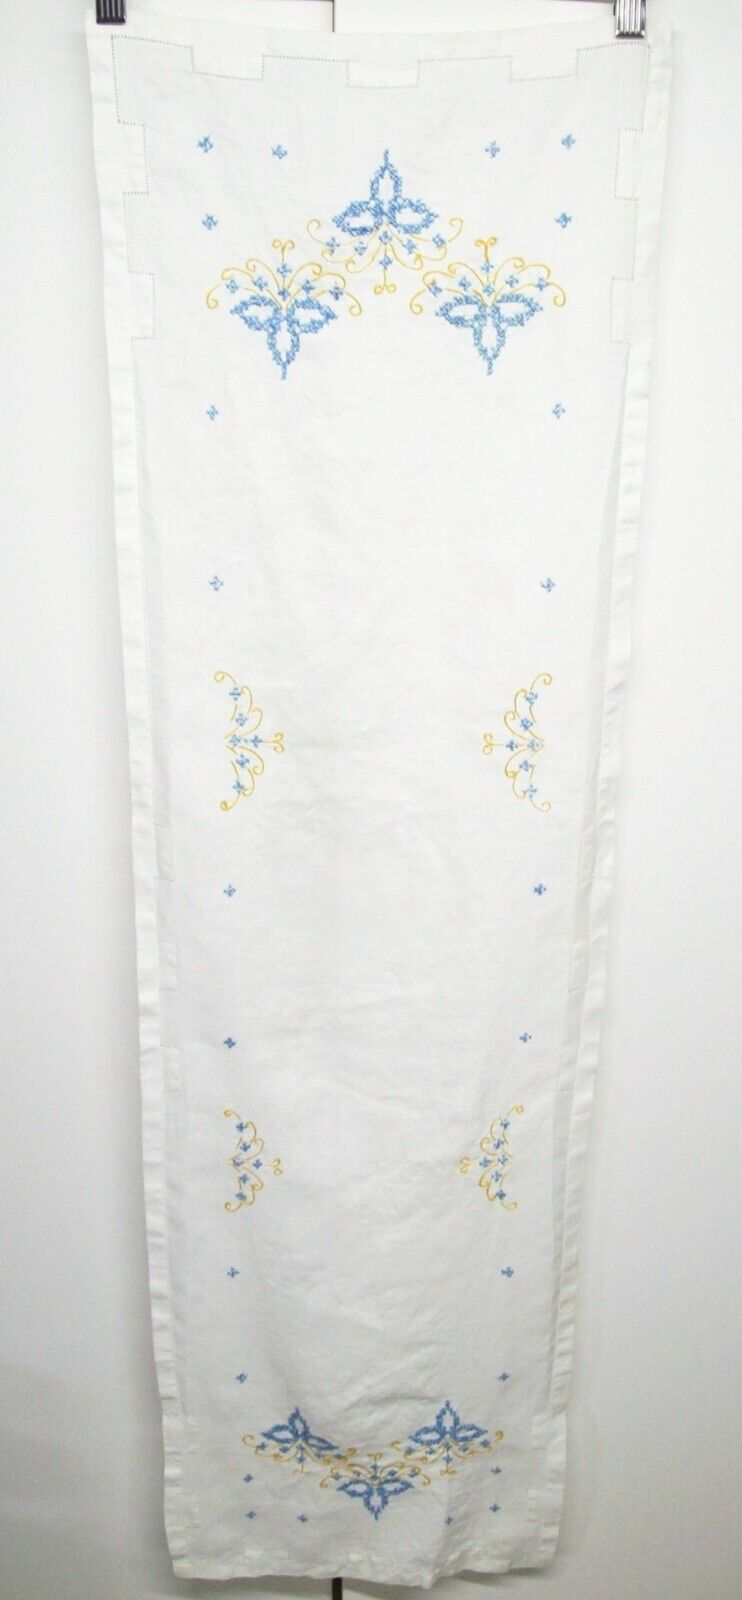 CROSS STICHED HAND EMBROIDERED TABLE/DRESSER RUNNER  49\